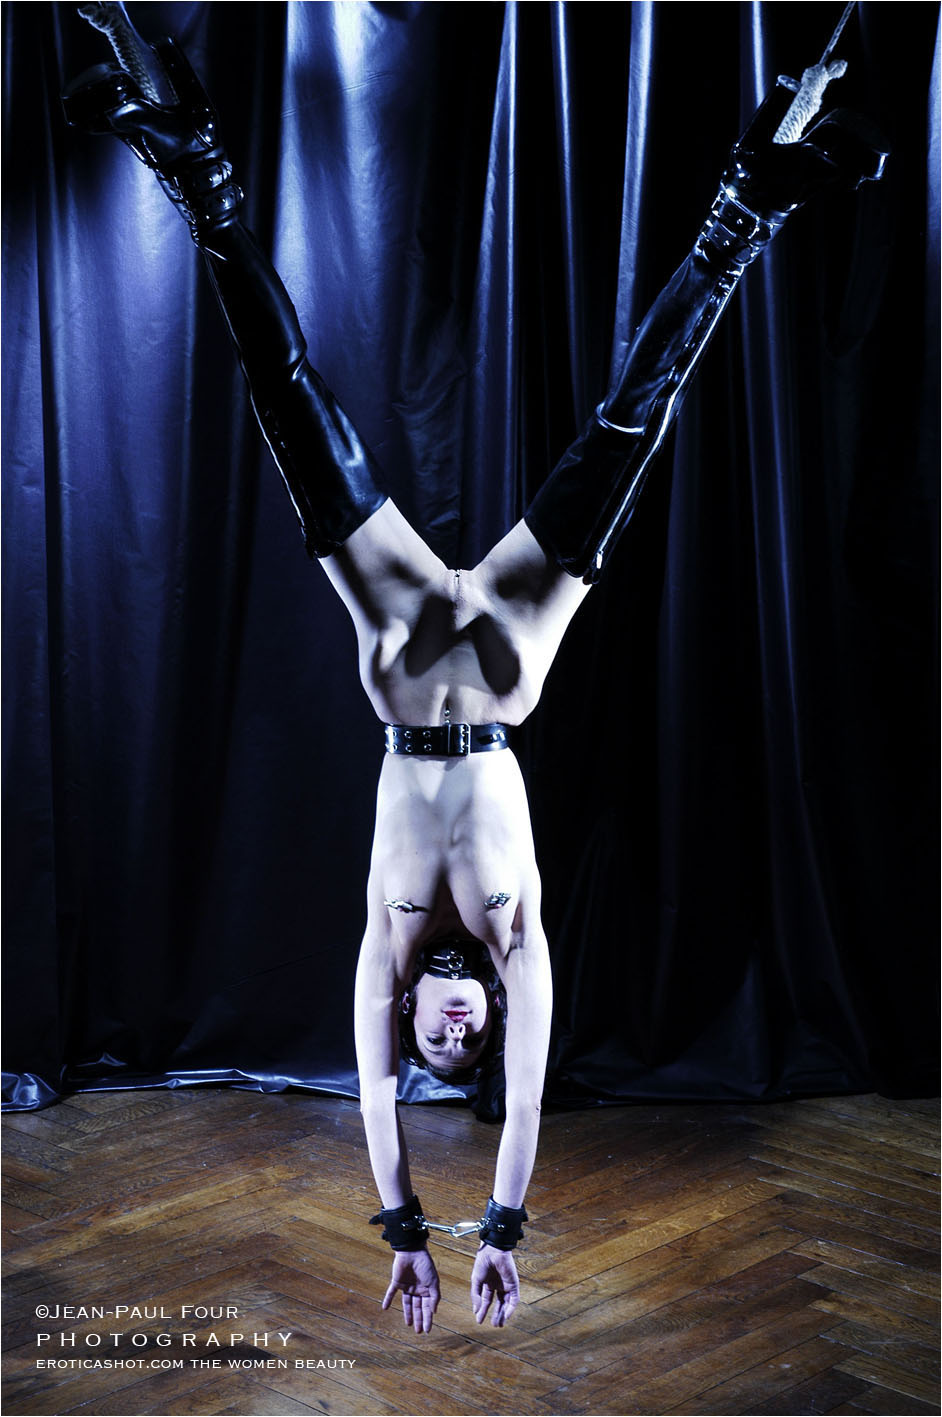 Brathgirl, sub, slave, property of BtayhNarkos, dark clinic, anal pumping, shibari, suspensions, piss game, pump follow her on eroticashot.com, pict by Jean-Paul Four